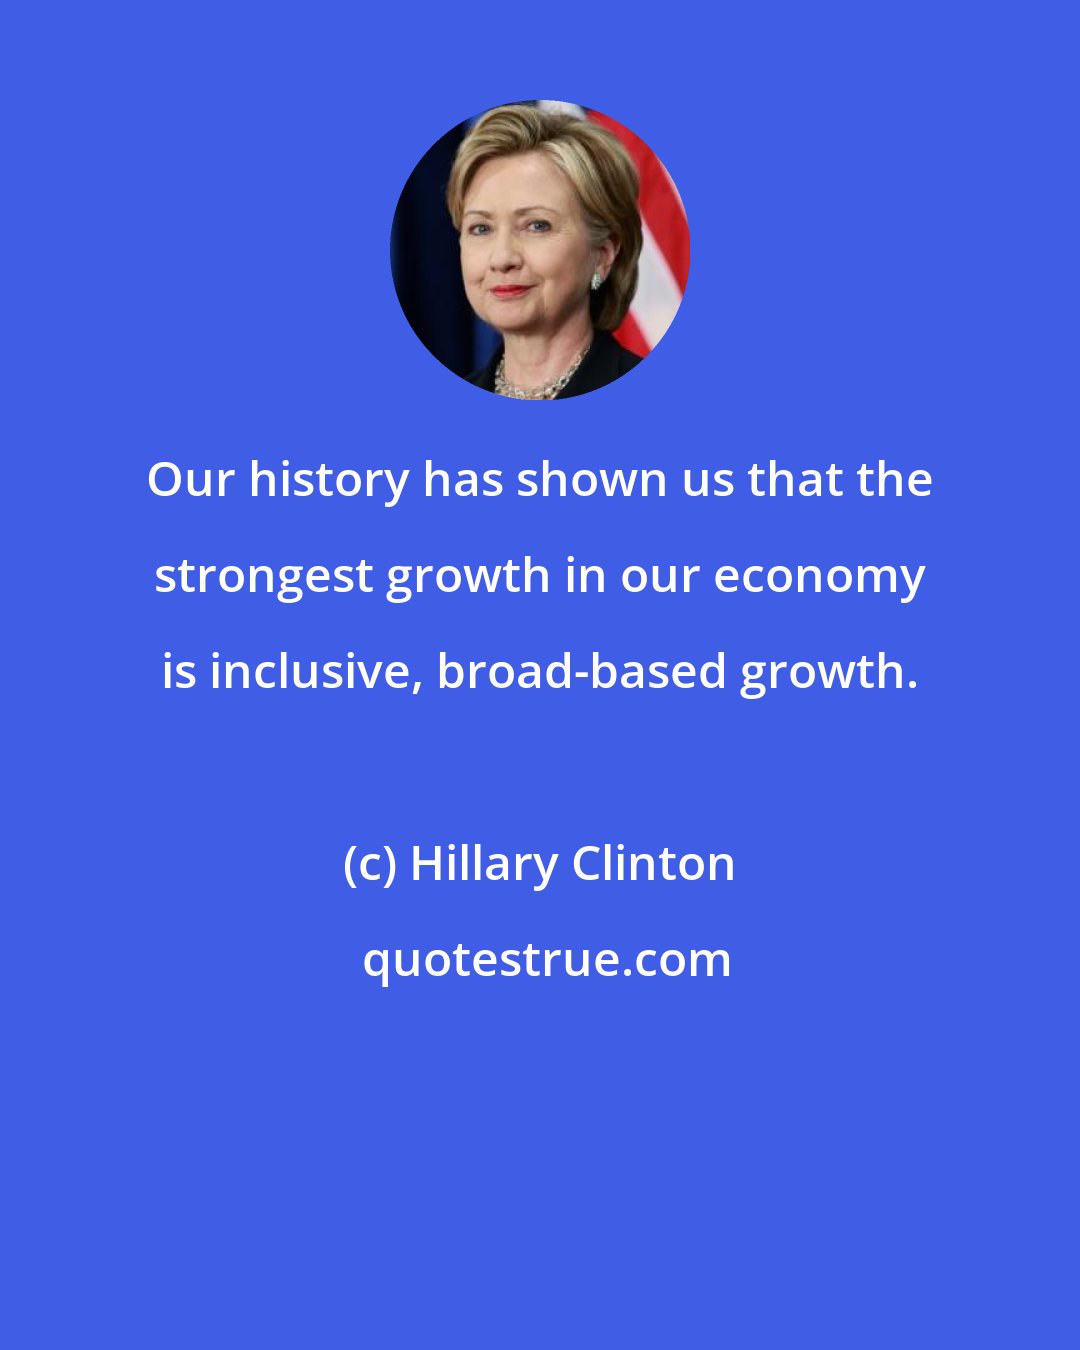 Hillary Clinton: Our history has shown us that the strongest growth in our economy is inclusive, broad-based growth.